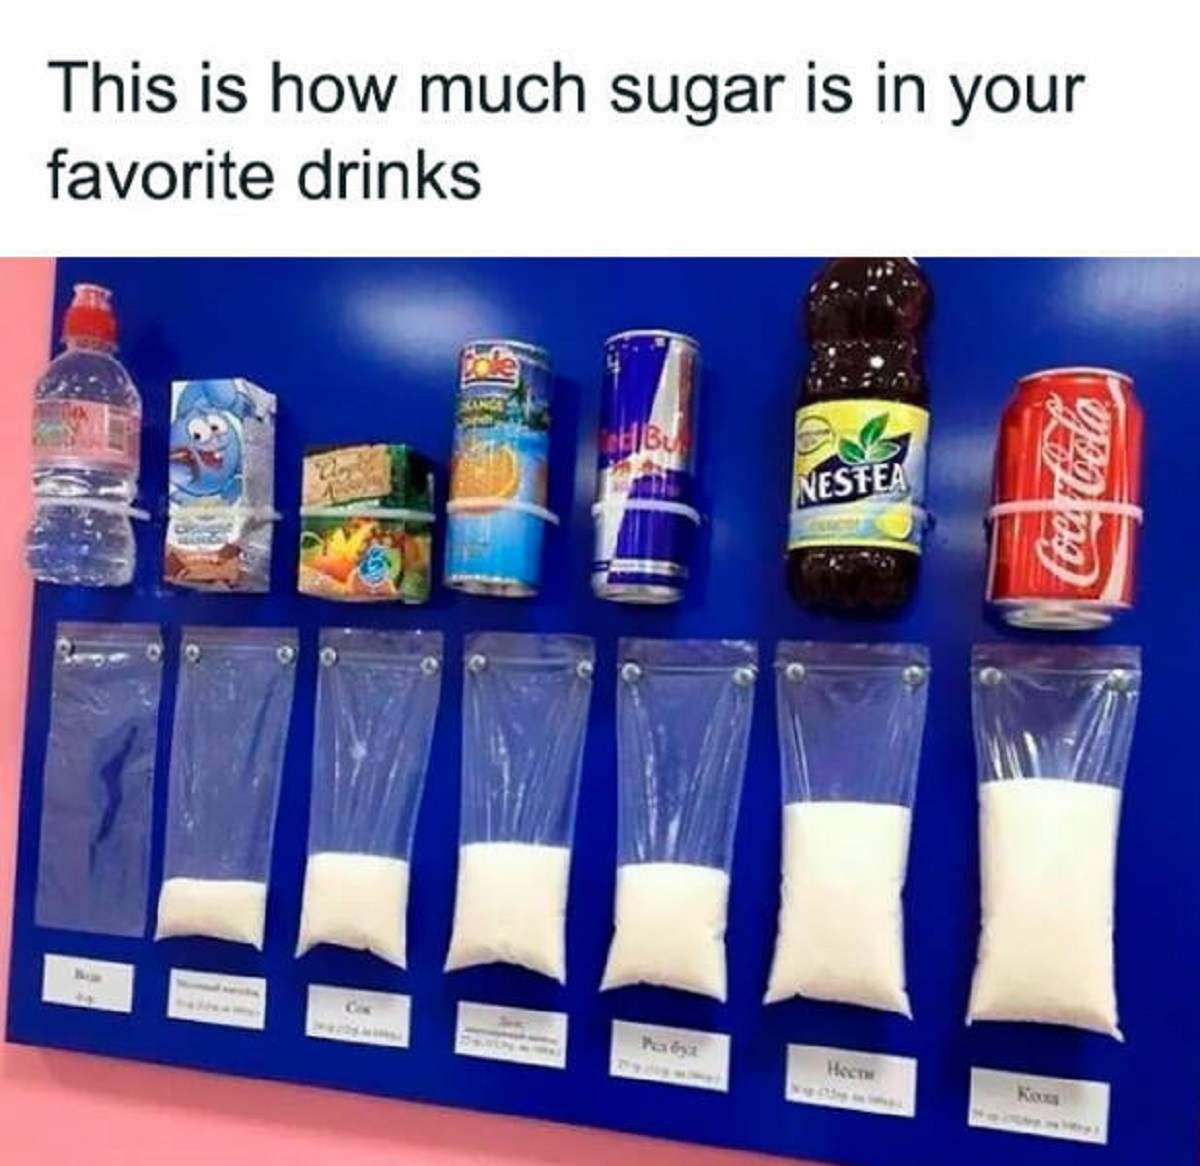 drinks sugar level - This is how much sugar is in your favorite drinks Bu Nestea Pabyt Heet Koots CocaCola